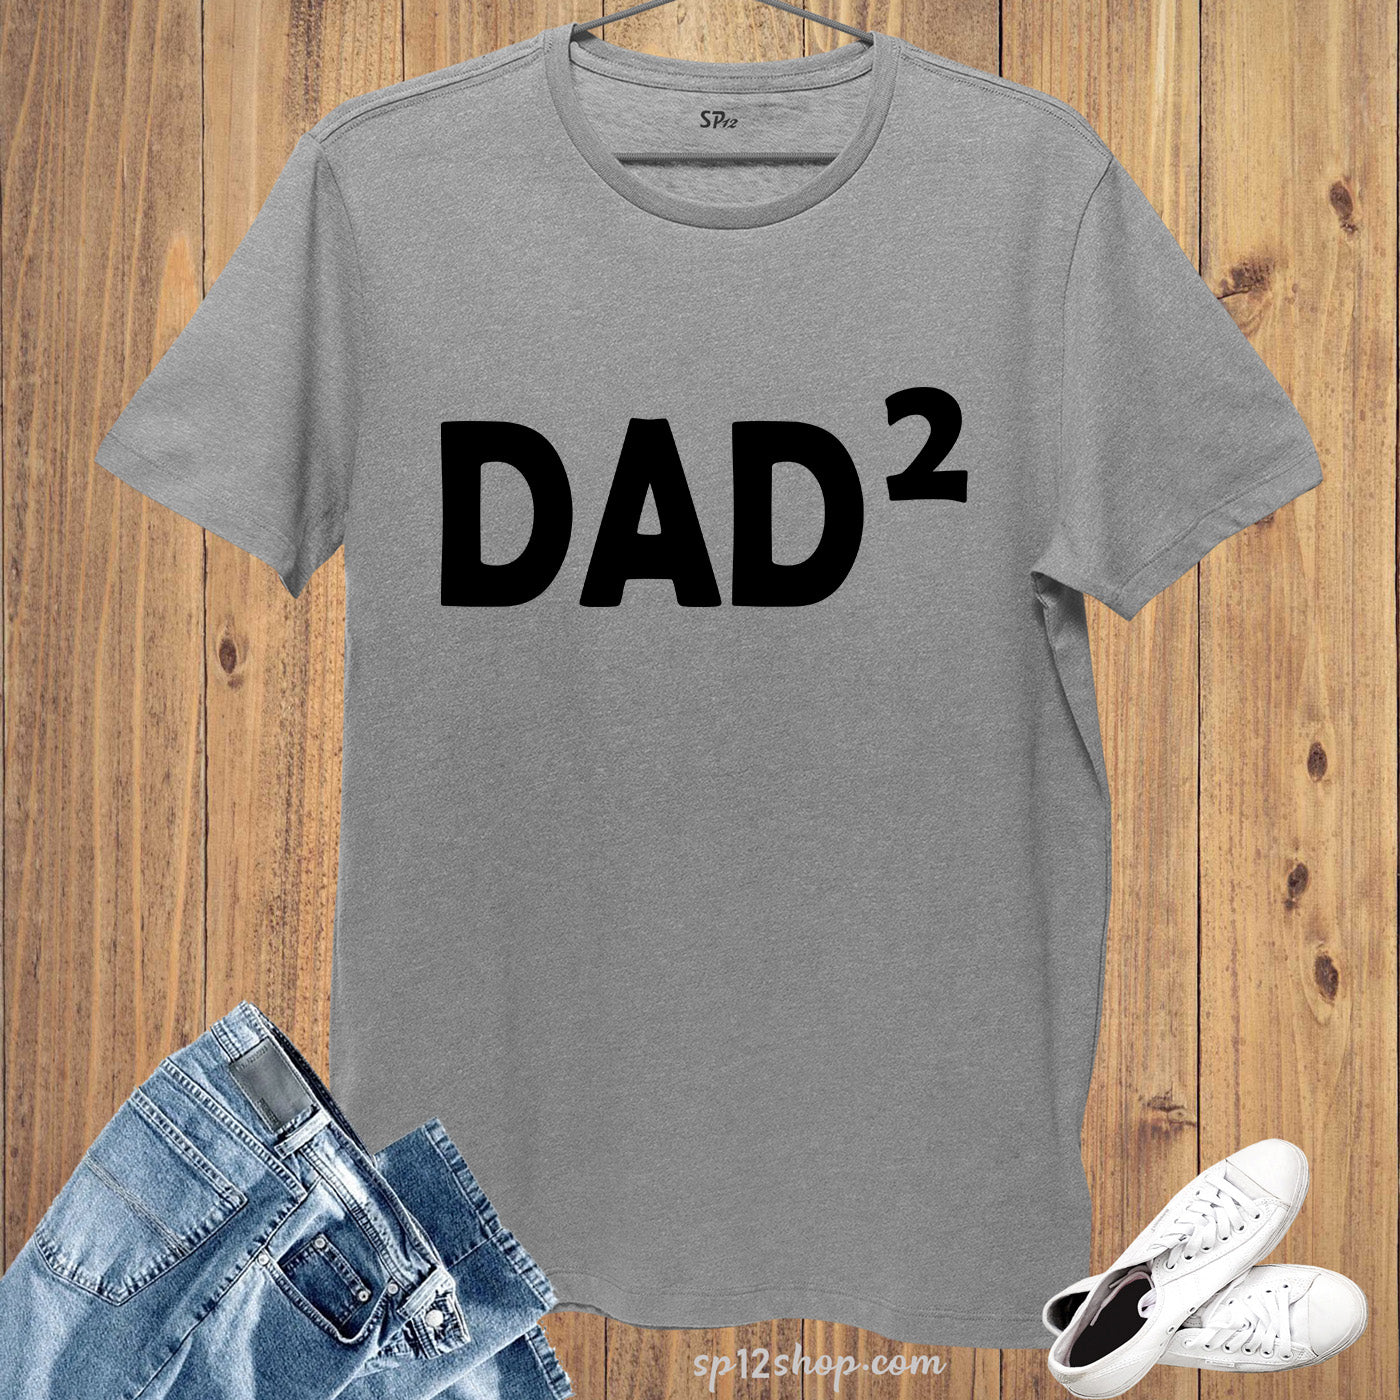 Personalised Dad T Shirts